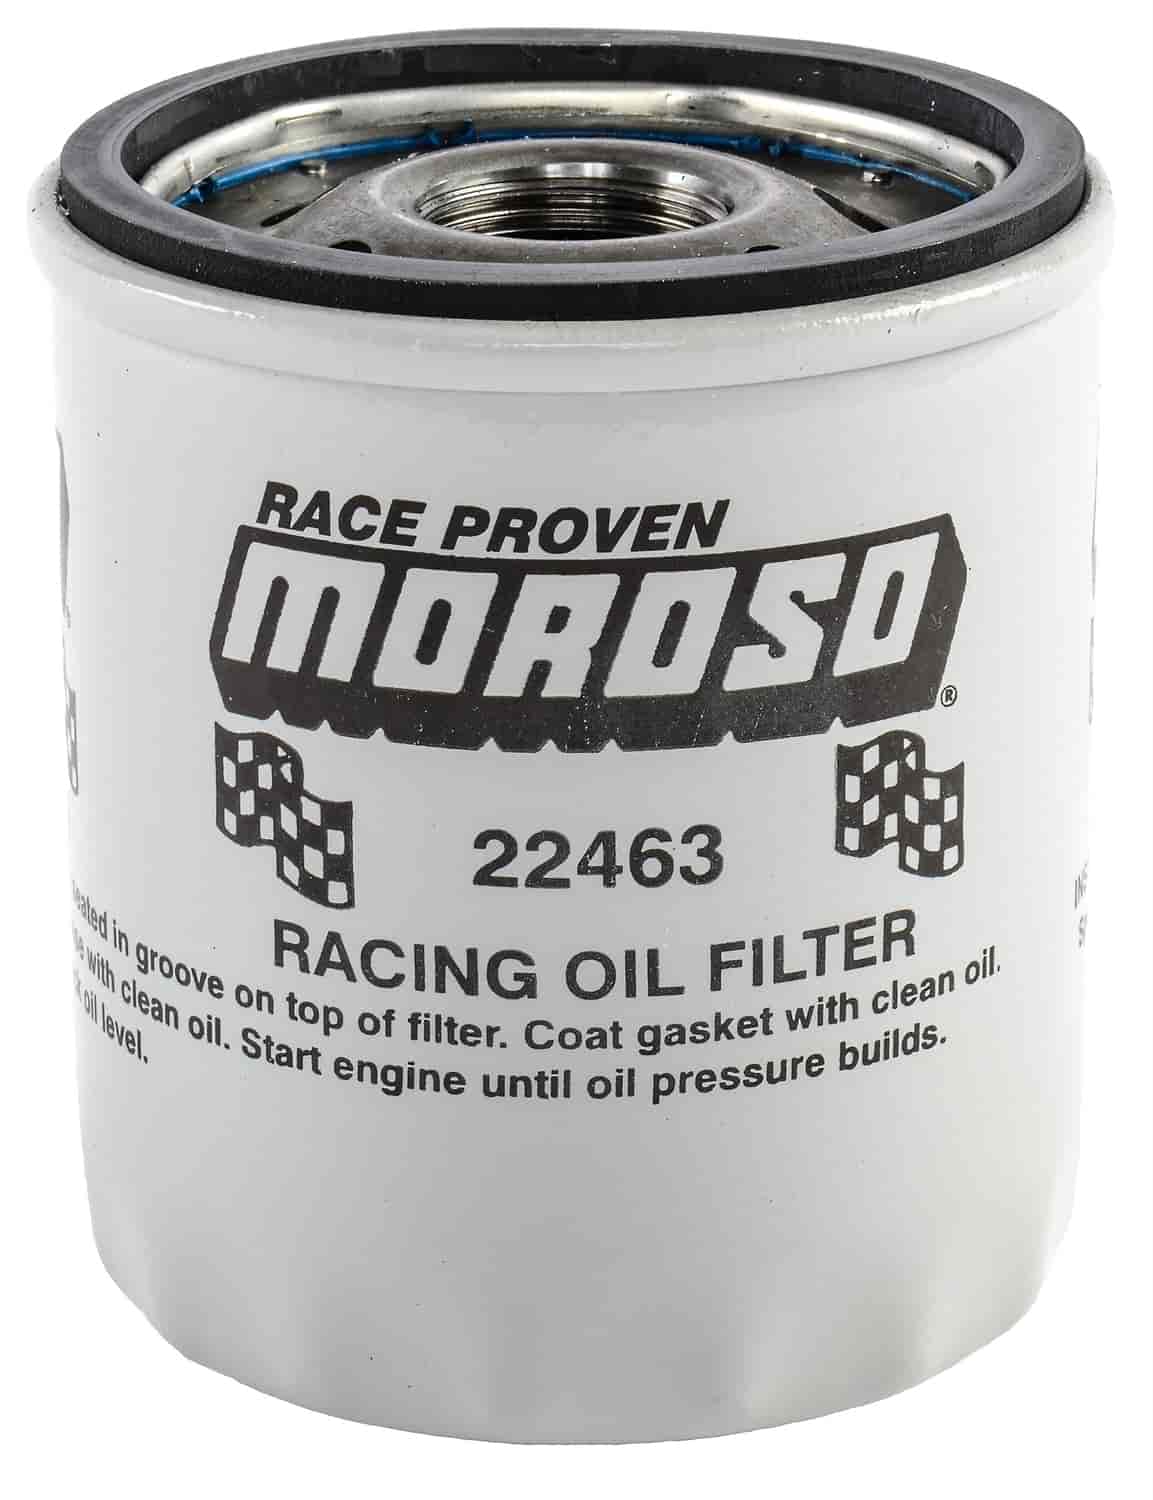 Racing Oil Filter For Ford Modular and GM LS-Series Engines